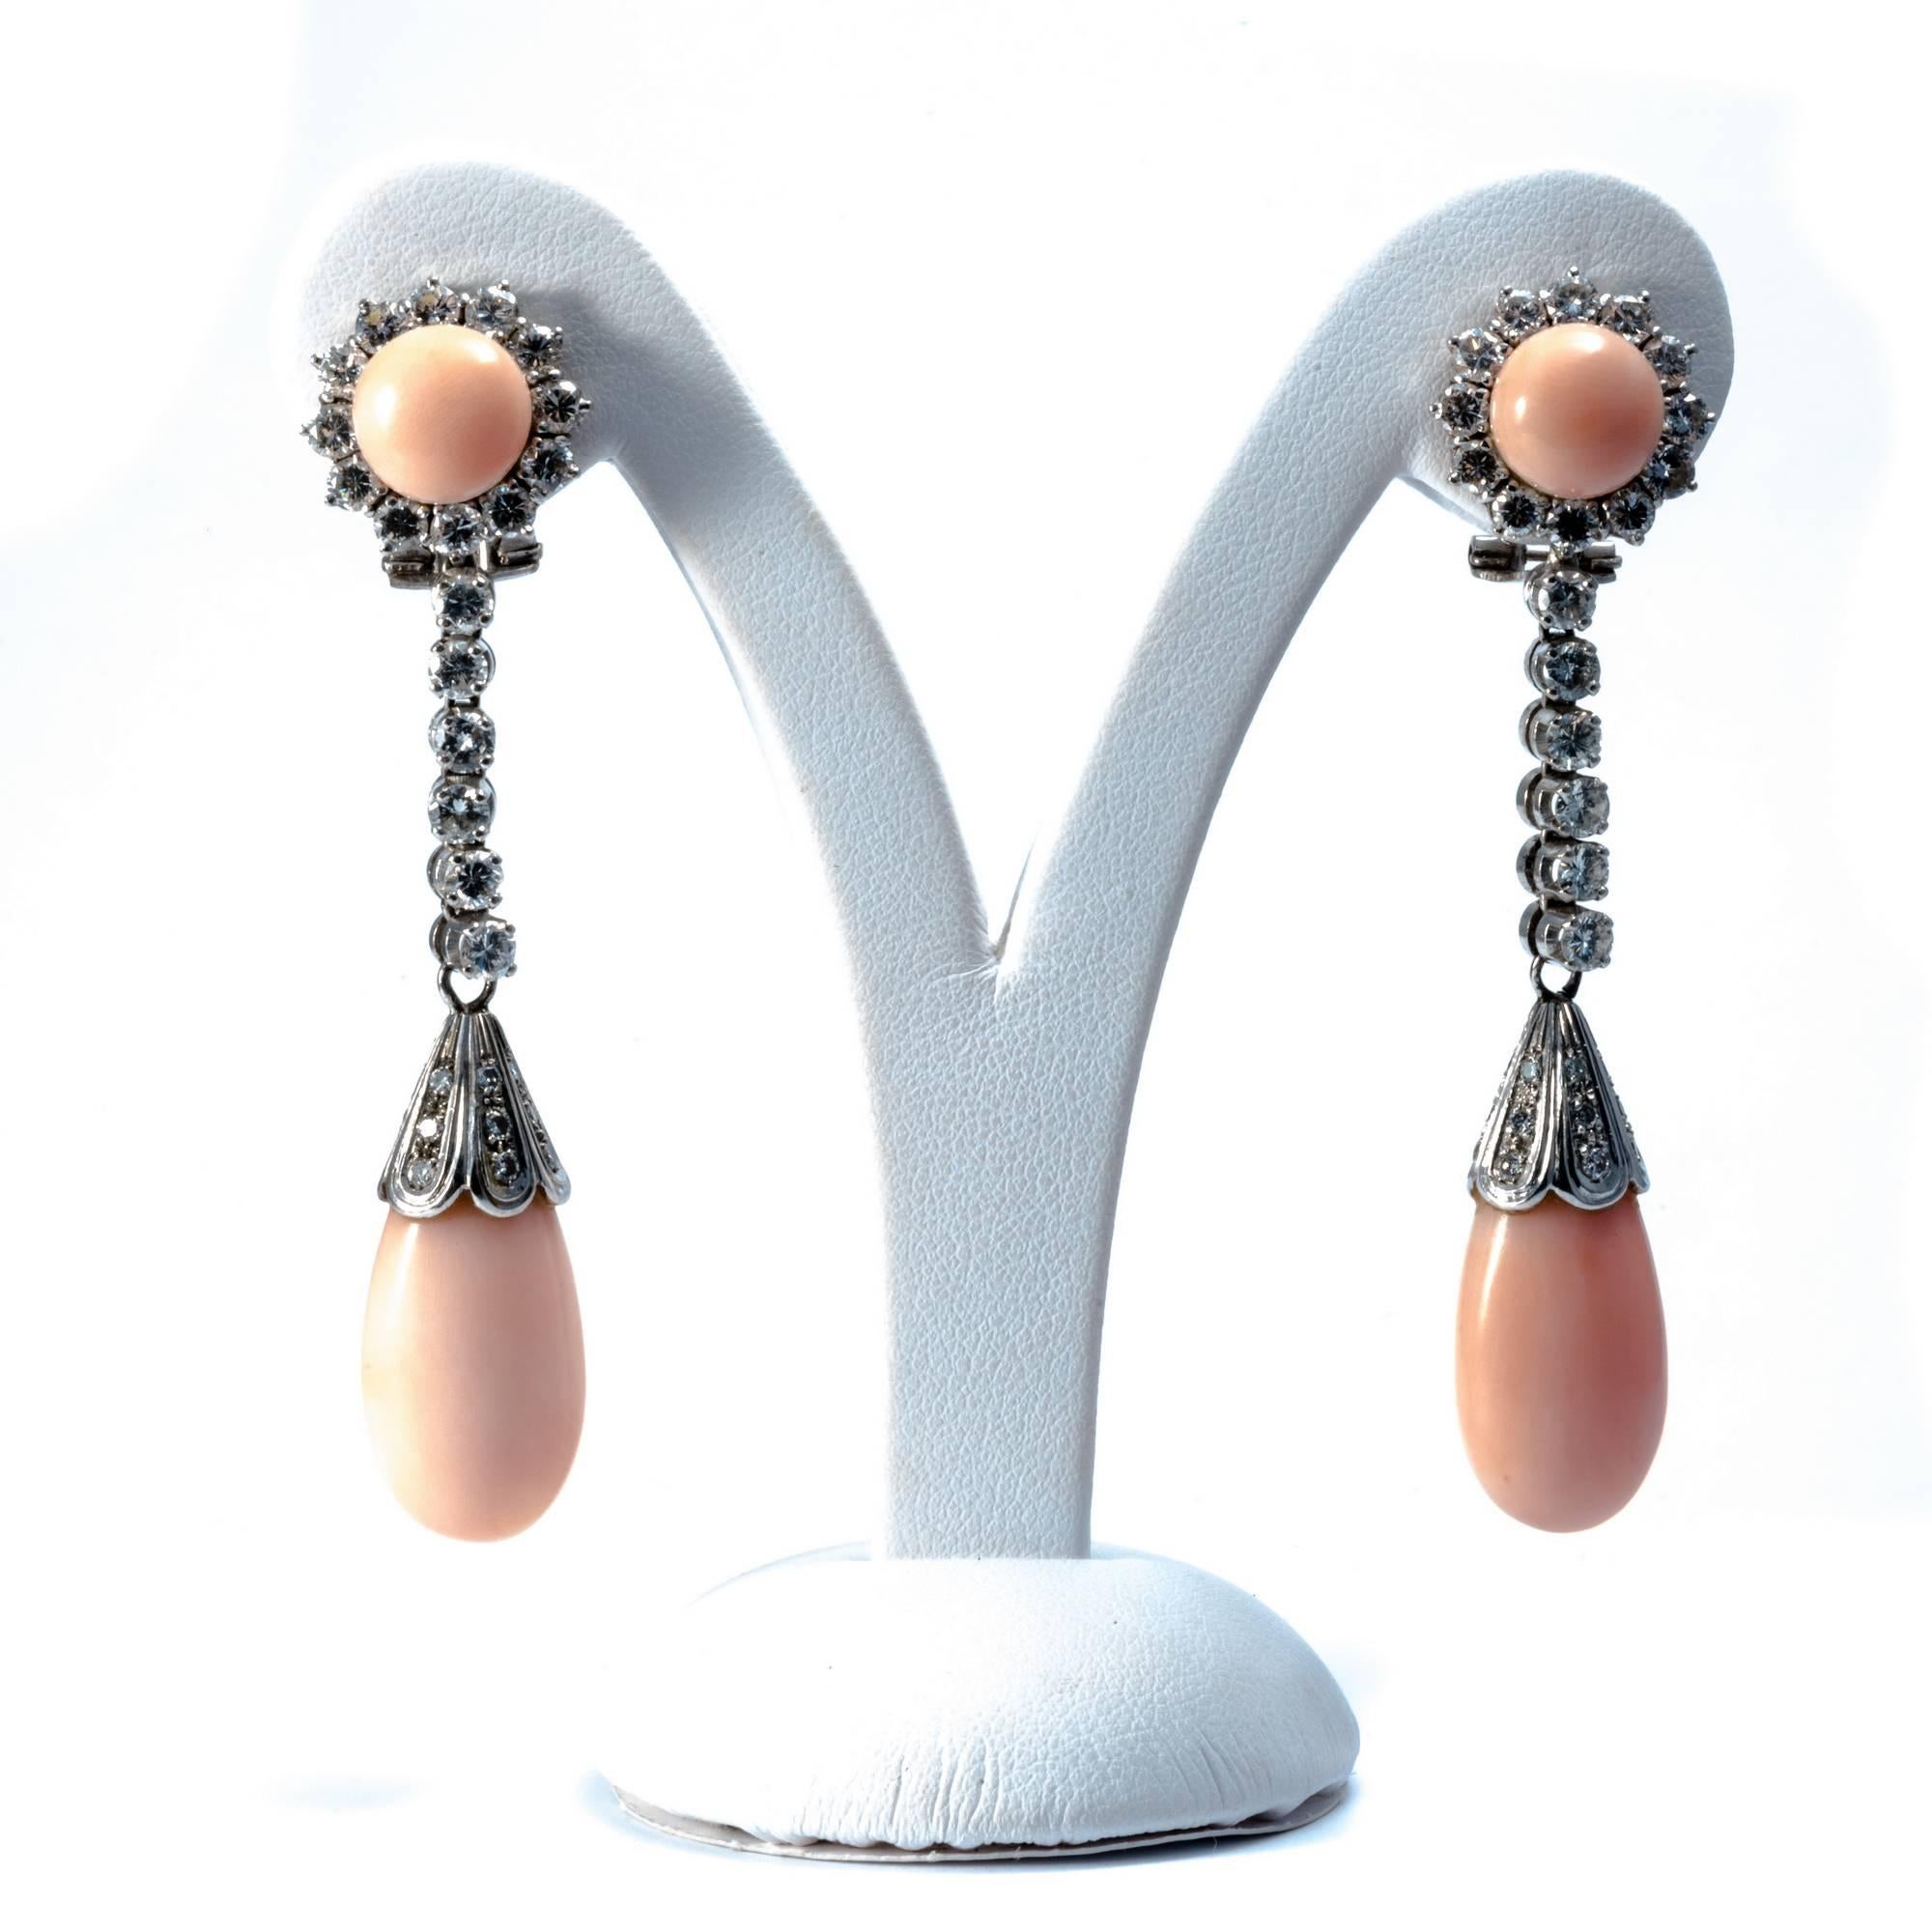 Classic and romantic cluster earrings are dangling with a row of extra white diamonds and a light pink coral drop.
Upon request, earrings can be adjusted for pierced ears.